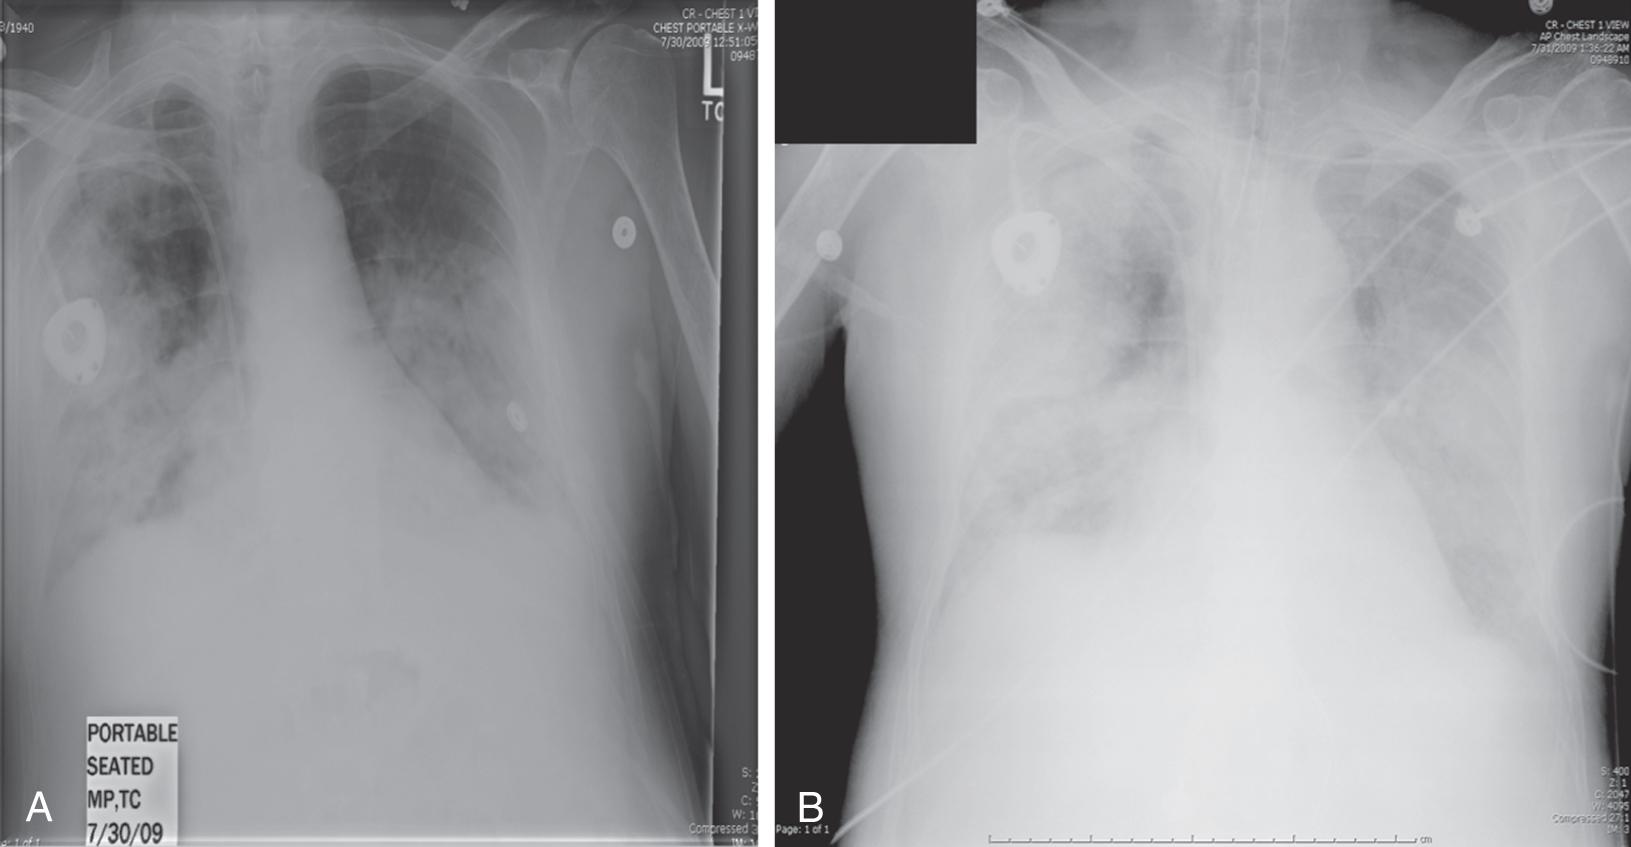 Fig. 119.2, A, Chest radiograph of a 70-year-old male with B-cell lymphoma and hypogammaglobulinemia in the ICU with primary influenza pneumonia. Note Port-a-Cath in right anterior chest wall and diffuse pulmonary infiltrates, most prominently seen in both lower lung fields. B, Chest radiograph of same patient 3 days later; note diffuse alveolar filling process associated with profound hypoxemia. The patient expired secondary to severe hypotension and acute kidney injury despite oseltamivir and intensive supportive care.